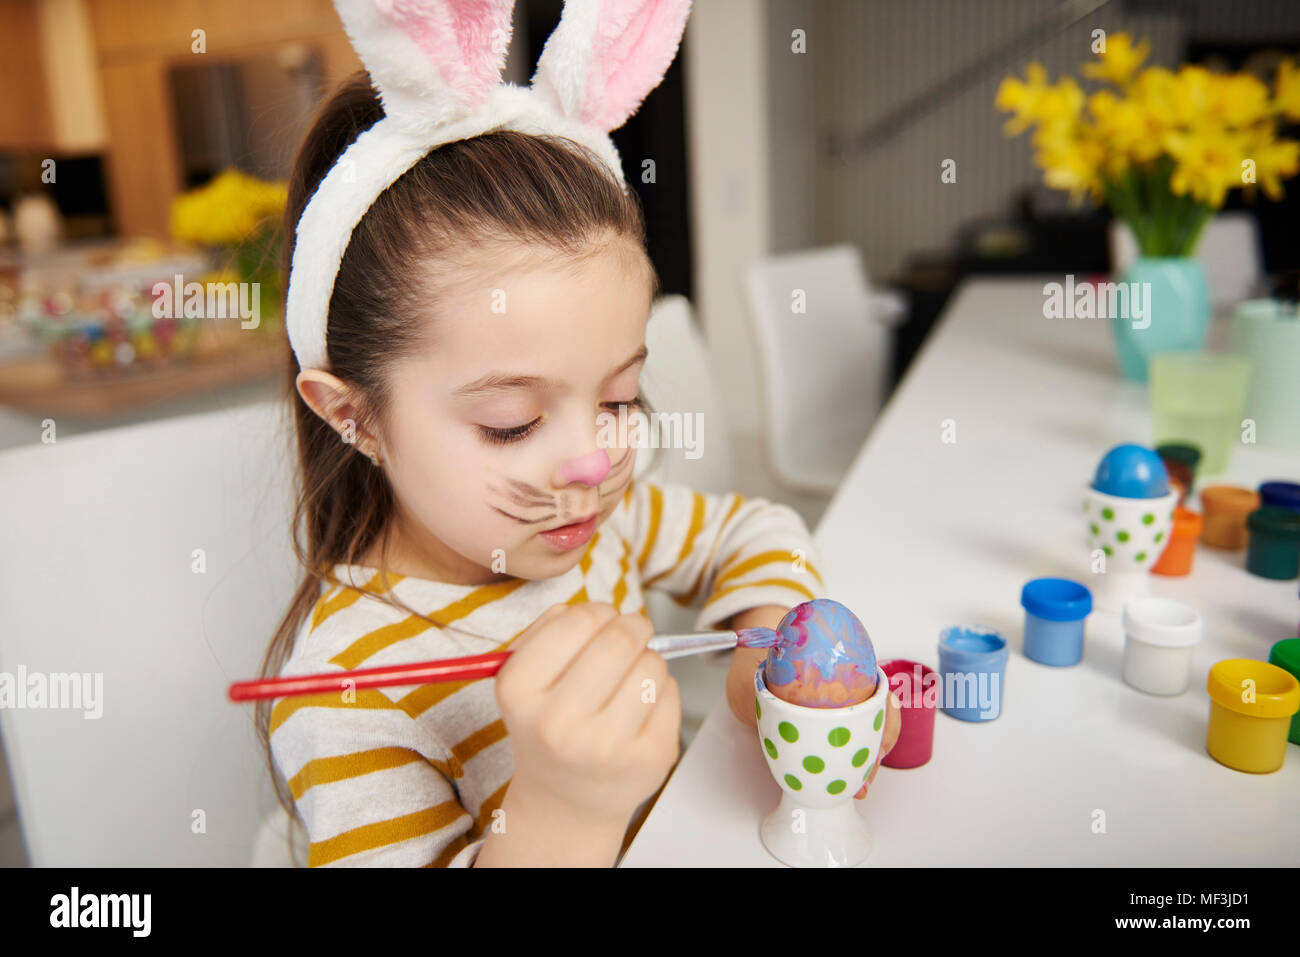 Girl with bunny ears sitting at table painting Easter eggs Stock Photo